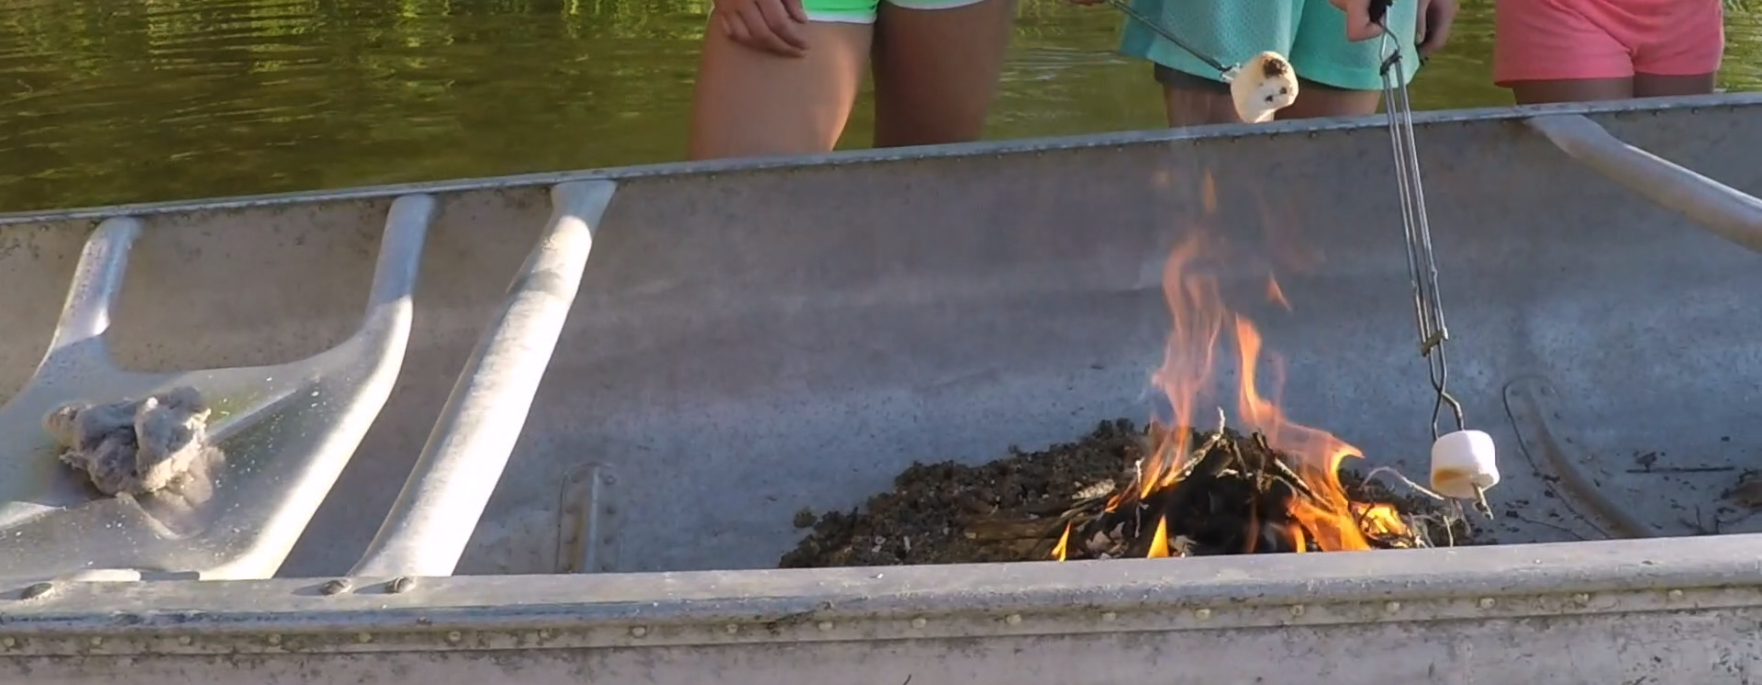 Girls Roasting Marshmallows over a Fire in a Canoe